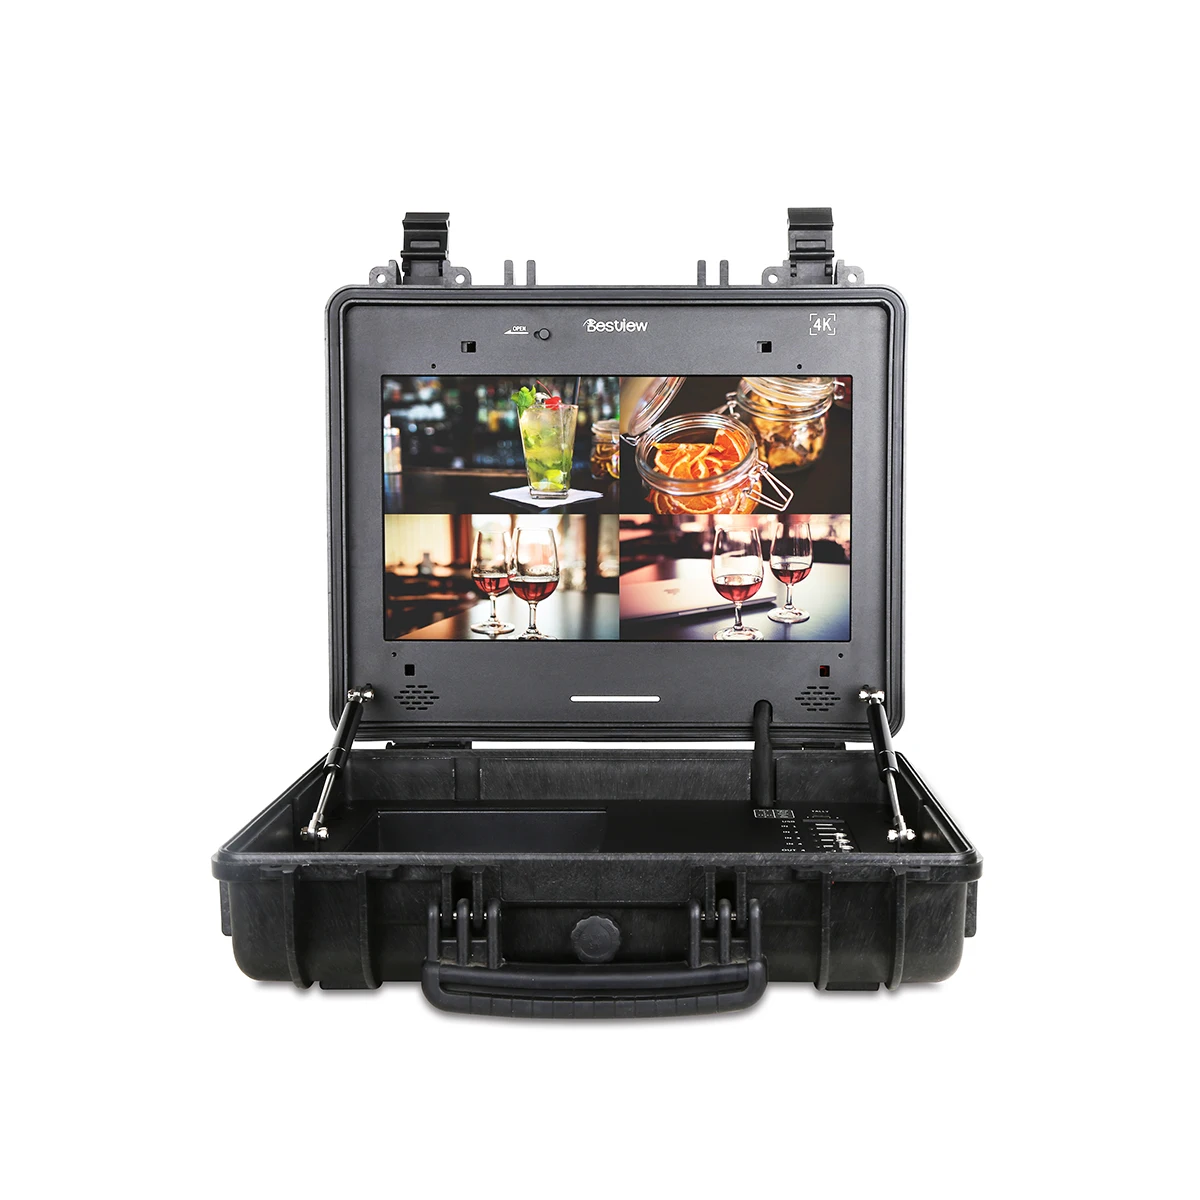 Bestview SP17-HDR 17.3" 4K UHD Multi View Quad-Split Portable Carry-On Broadcast Director Monitor